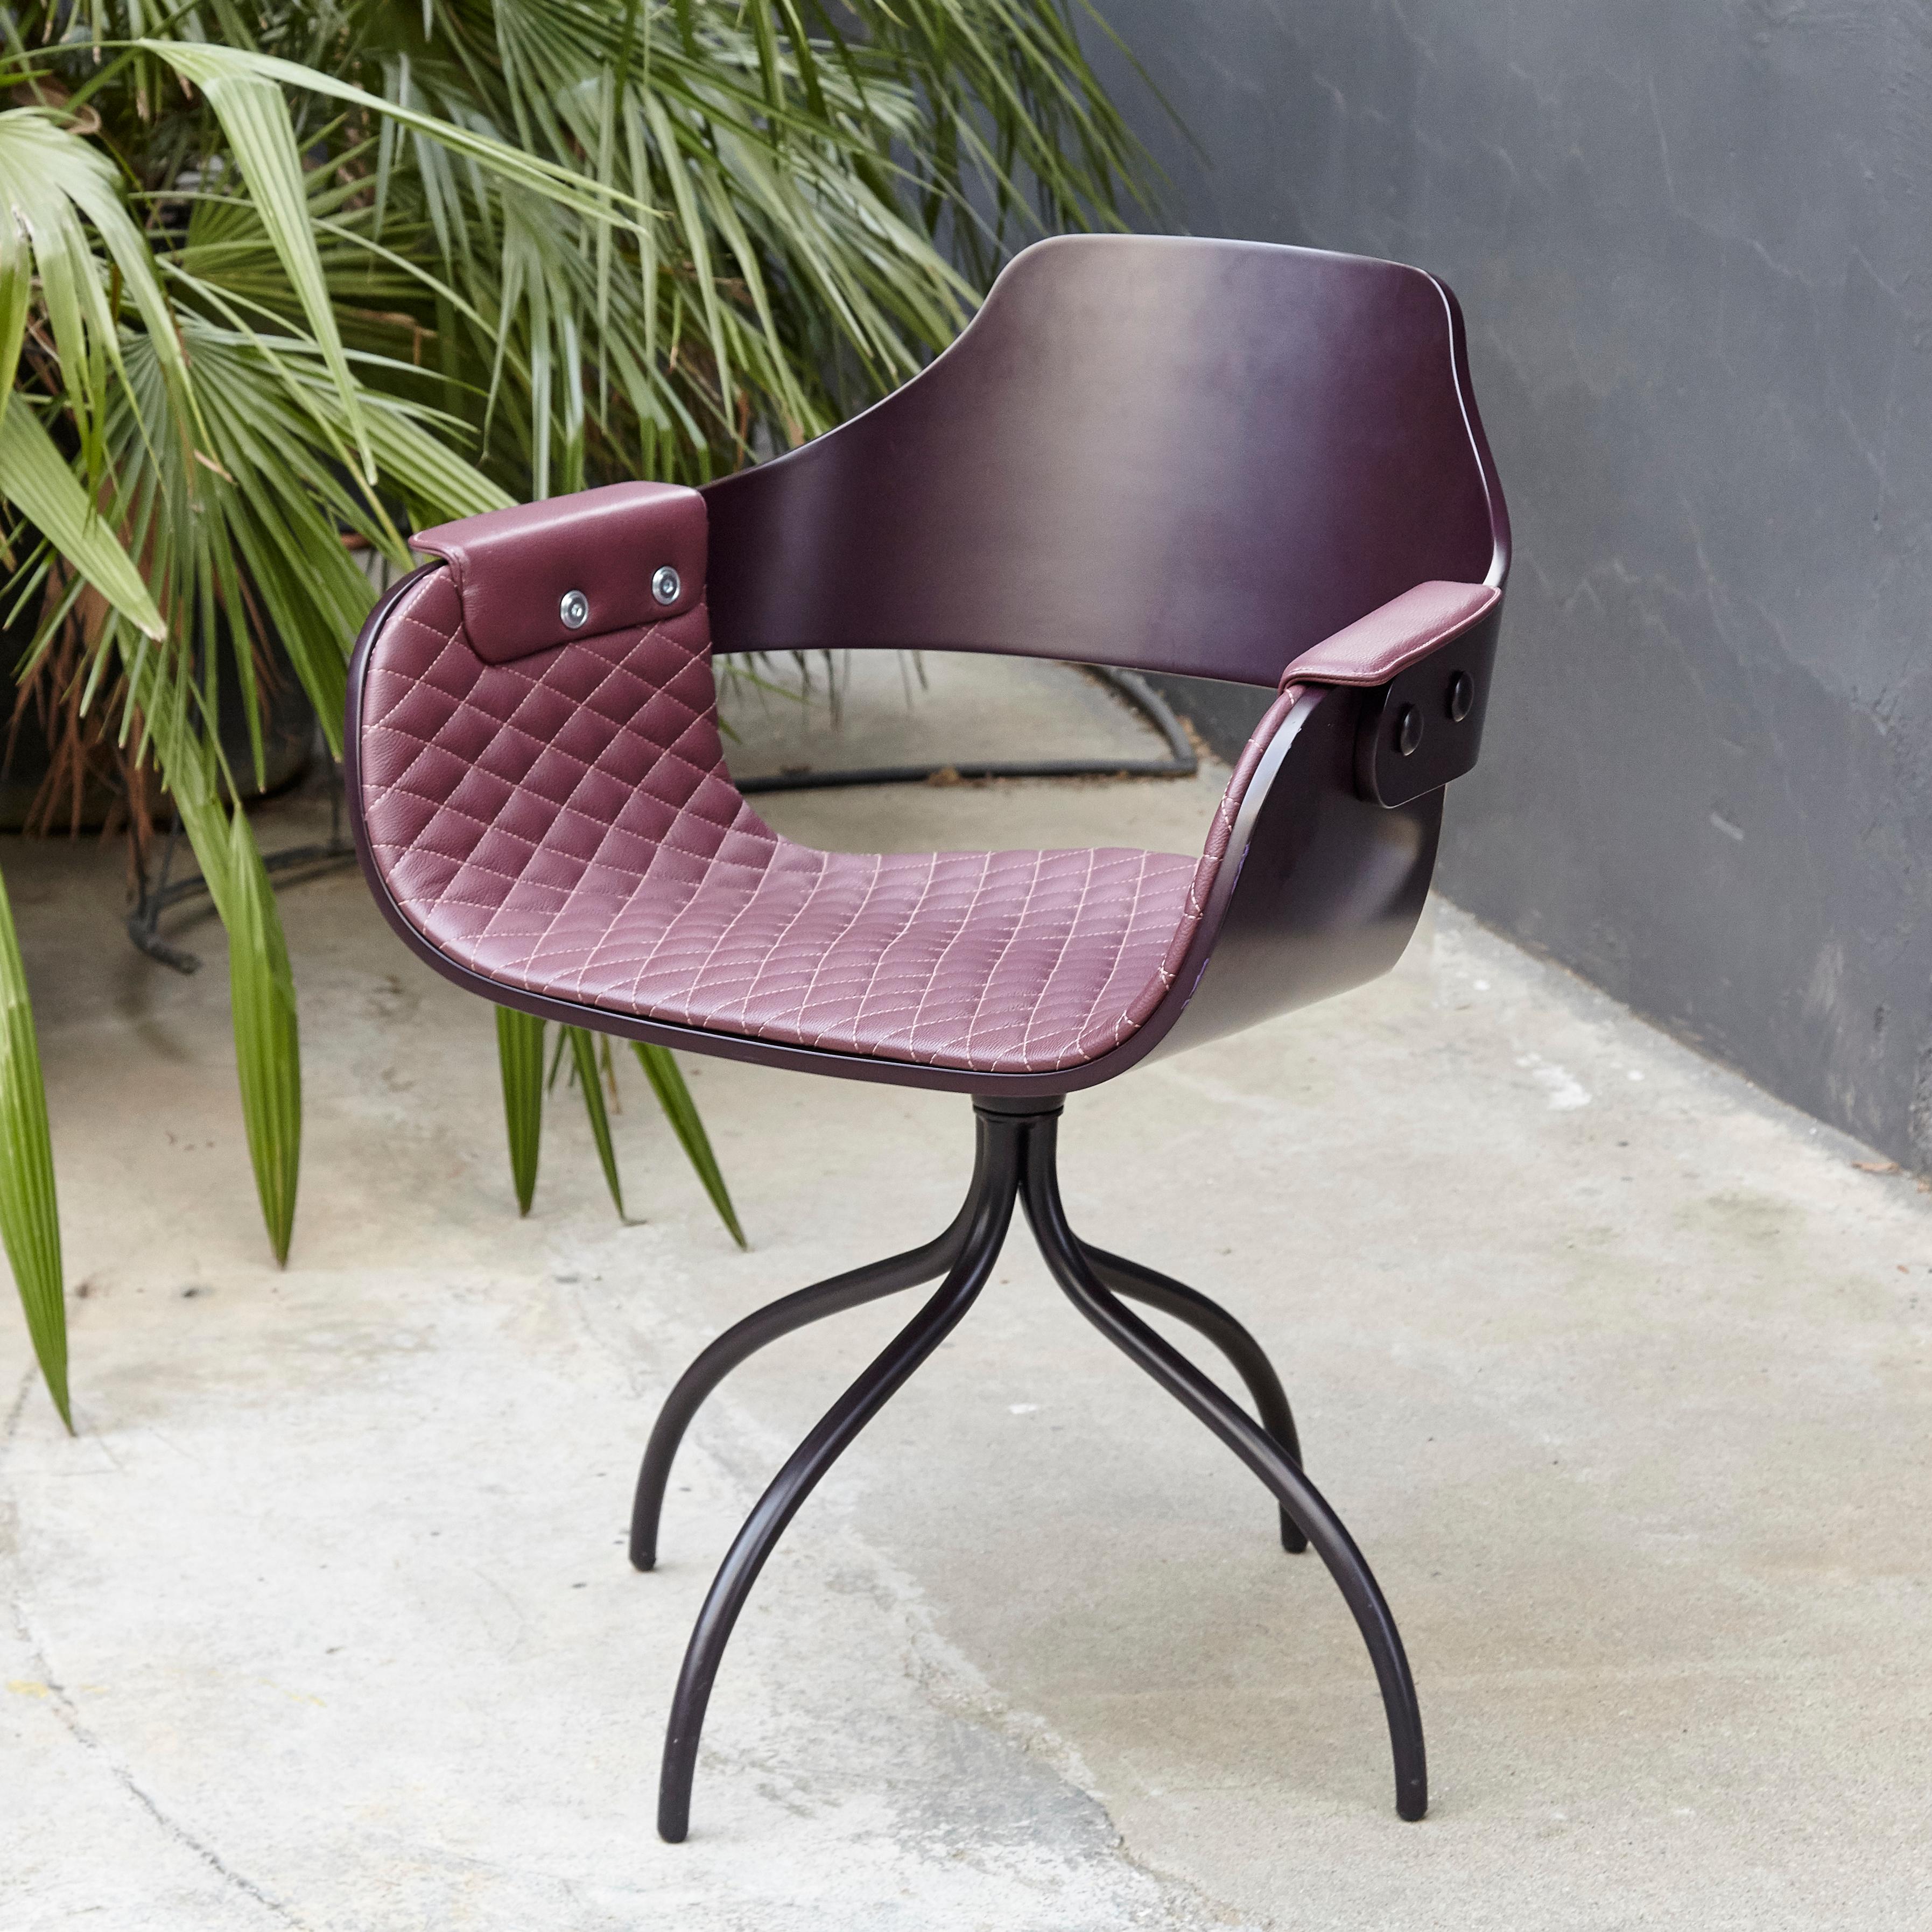 Spanish Jaime Hayon, Contemporary Upholstered Purple Wood Chair Showtime by BD Barcelona